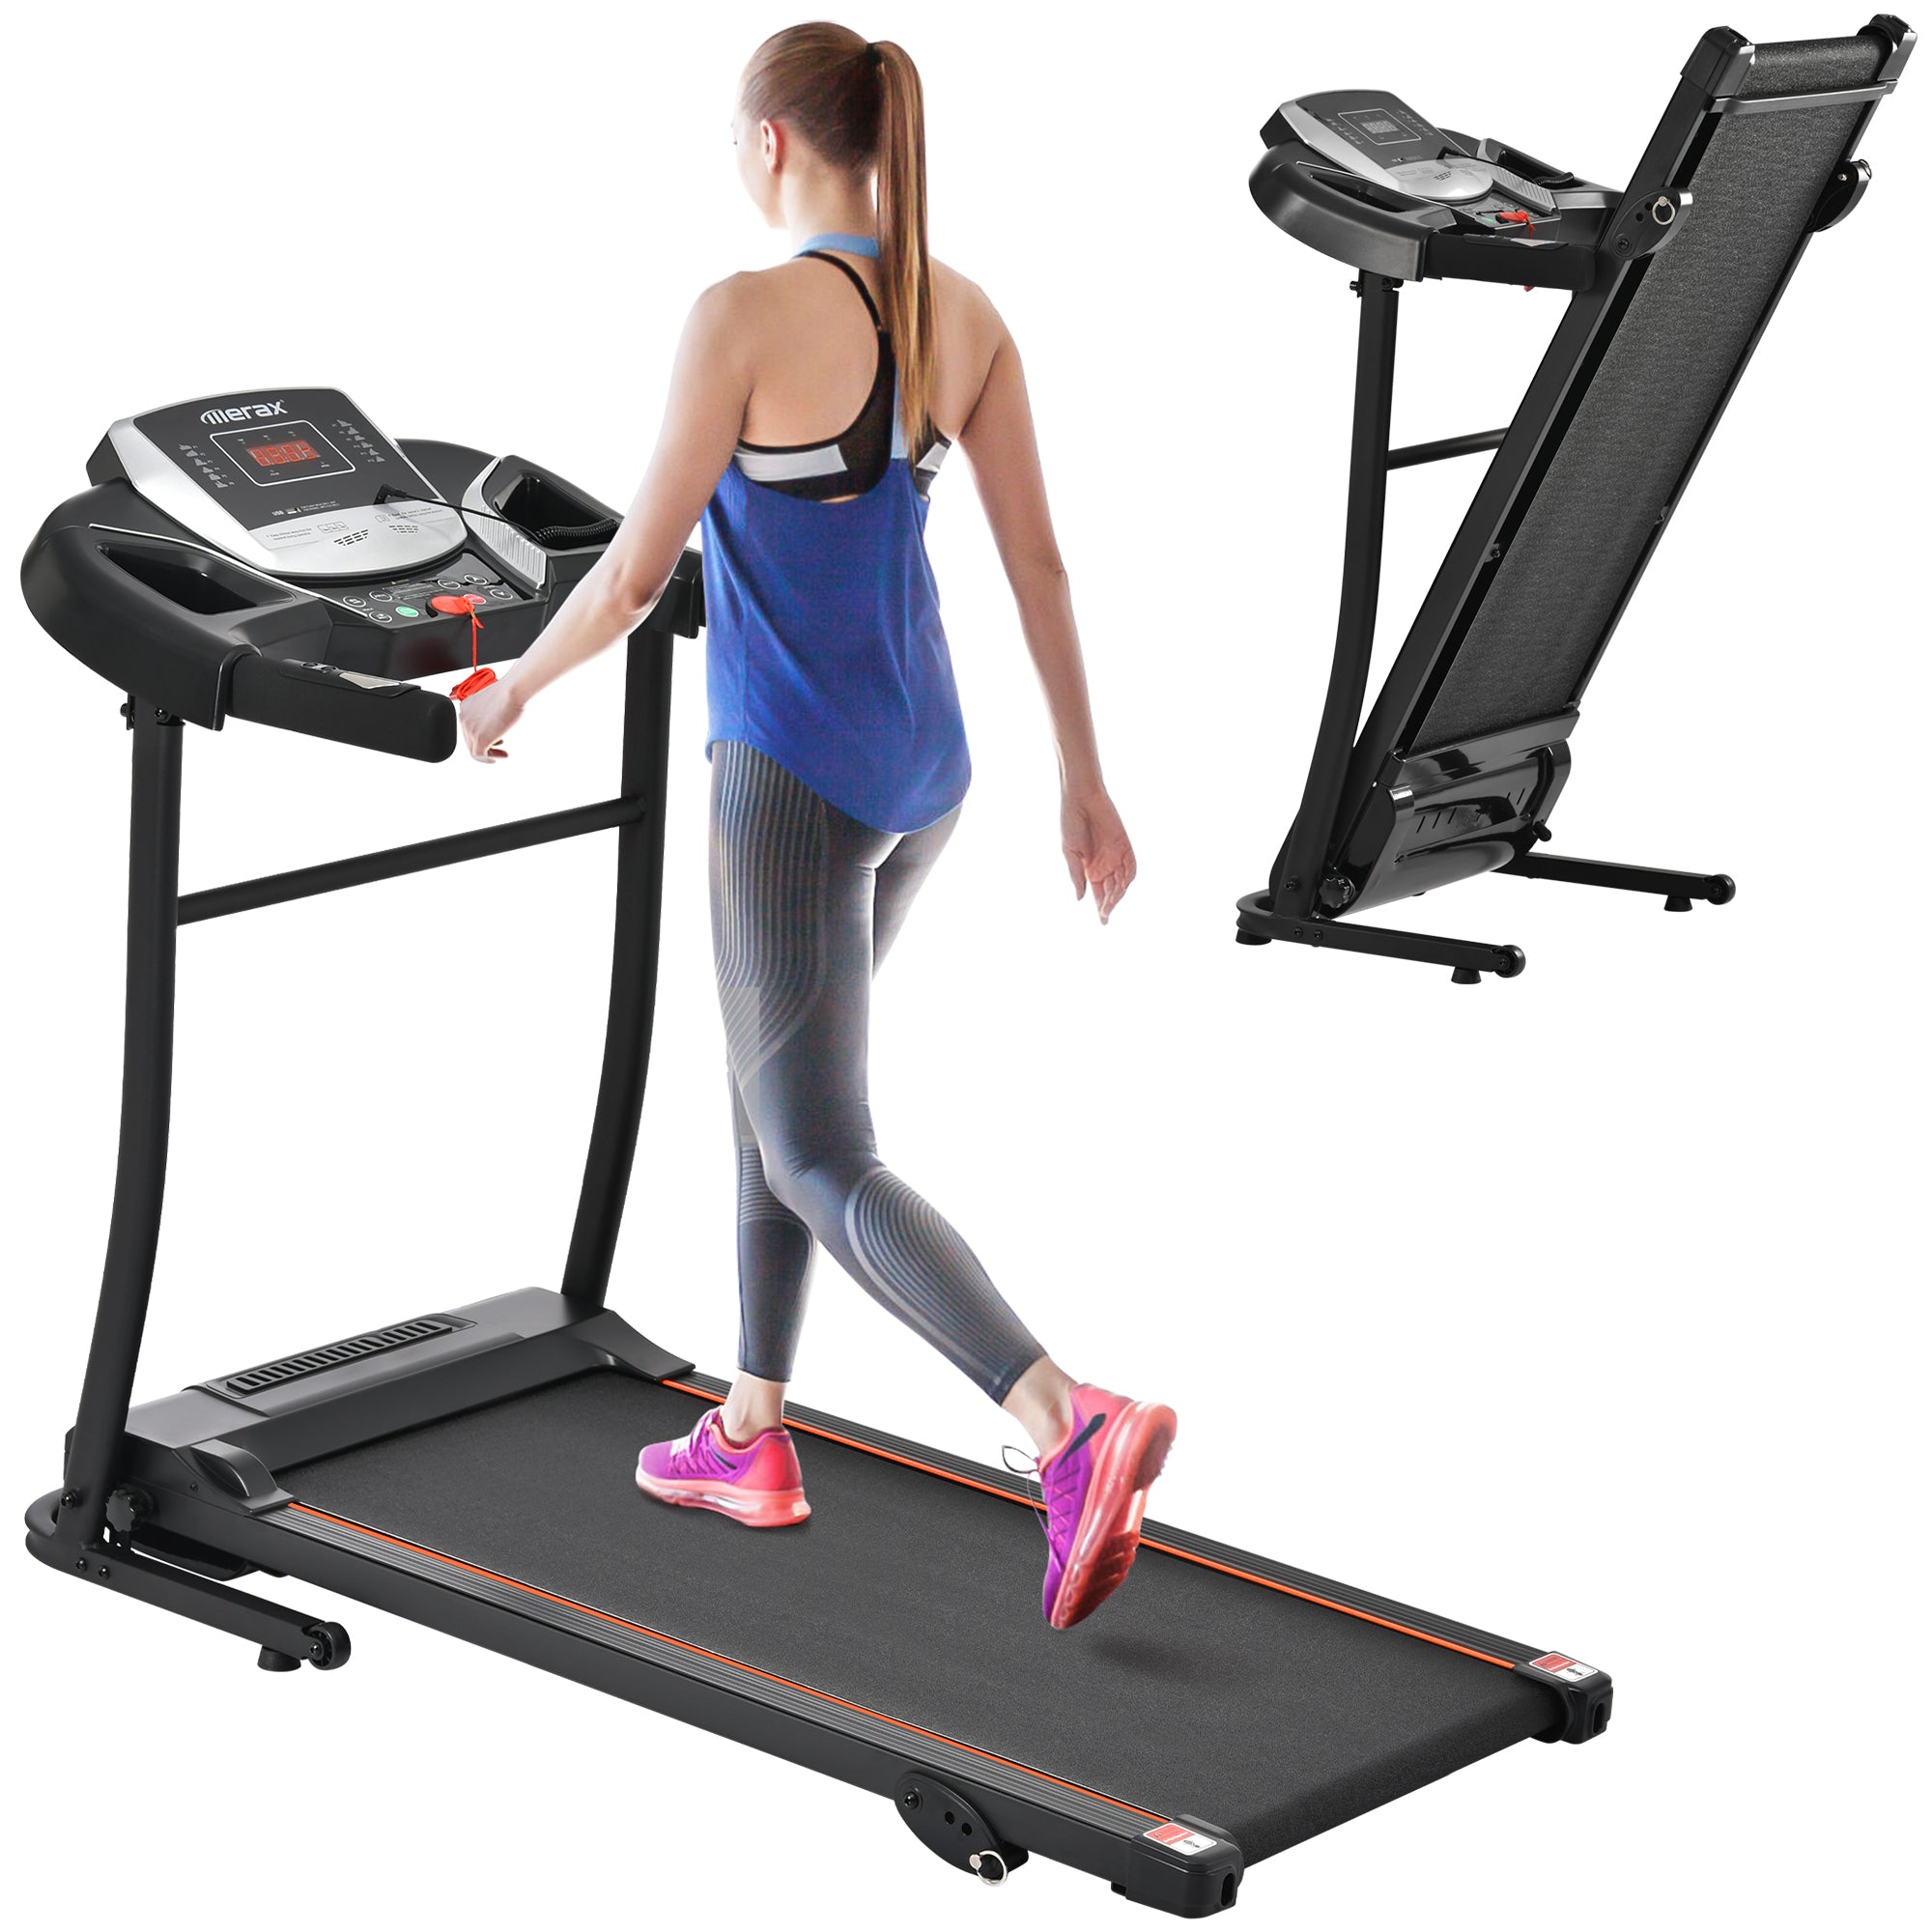 Folding Treadmill Electric Running Machine 2.5HP Motor 300LBS Weight Capacity Walking Jogging Machine with 3 Level Incline 12 Preset Programs for Home Gym